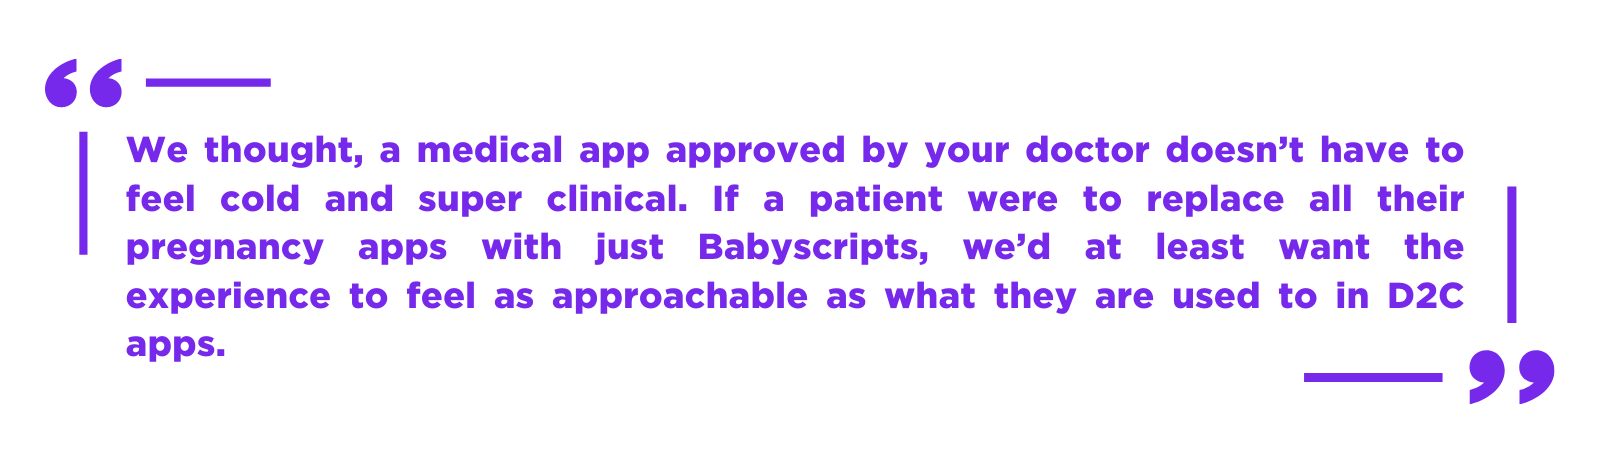 We thought, a medical app approved by your doctor doesn’t have to feel cold and super clinical. If a patient were to replace all their pregnancy apps with just Babyscripts, we’d at least want the experience to feel a (1)